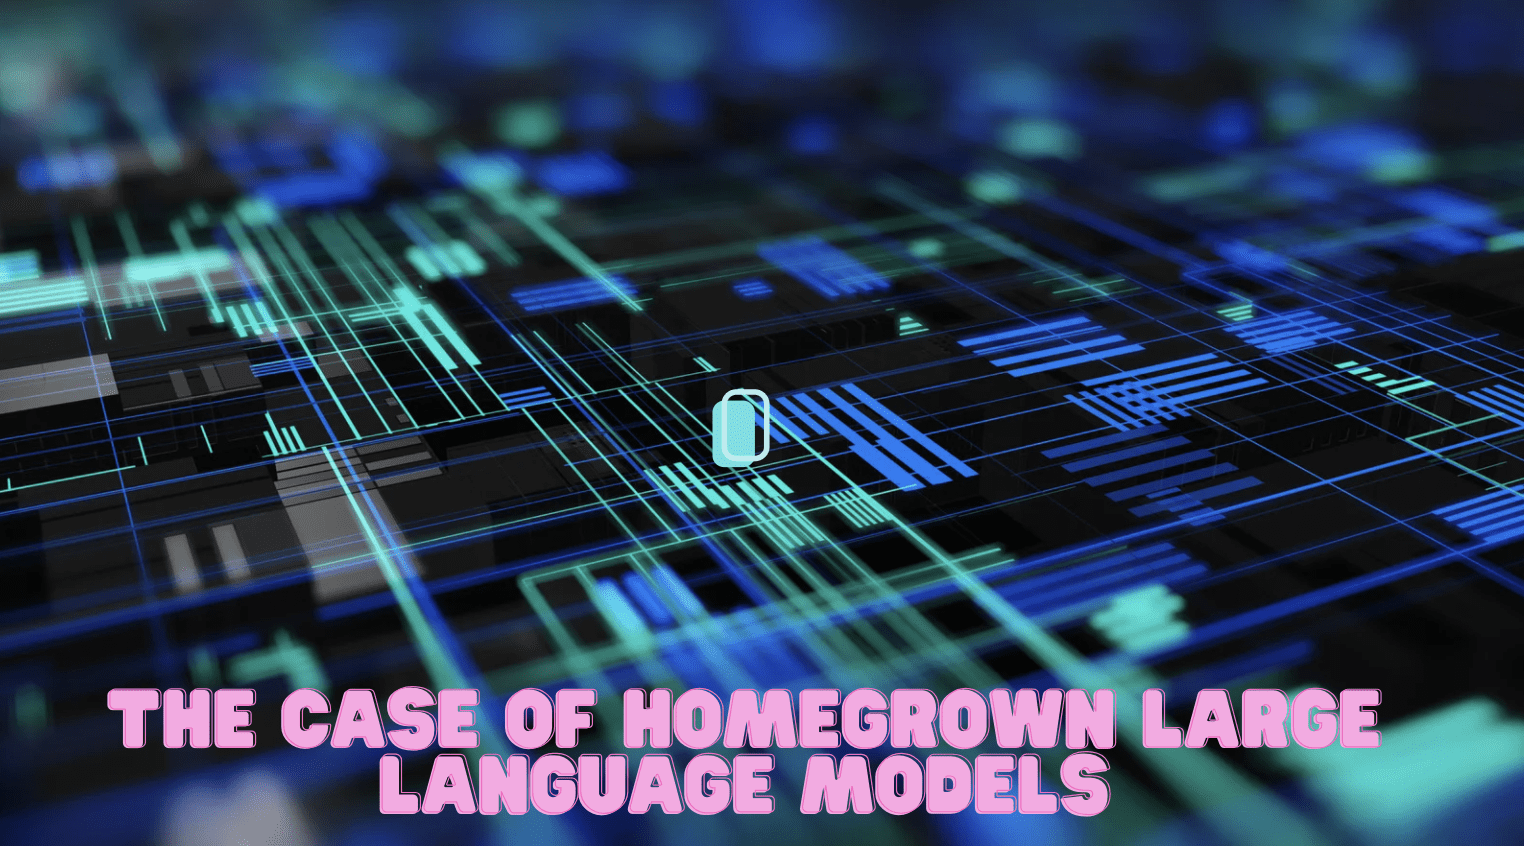 The Case of Homegrown Large Language Models